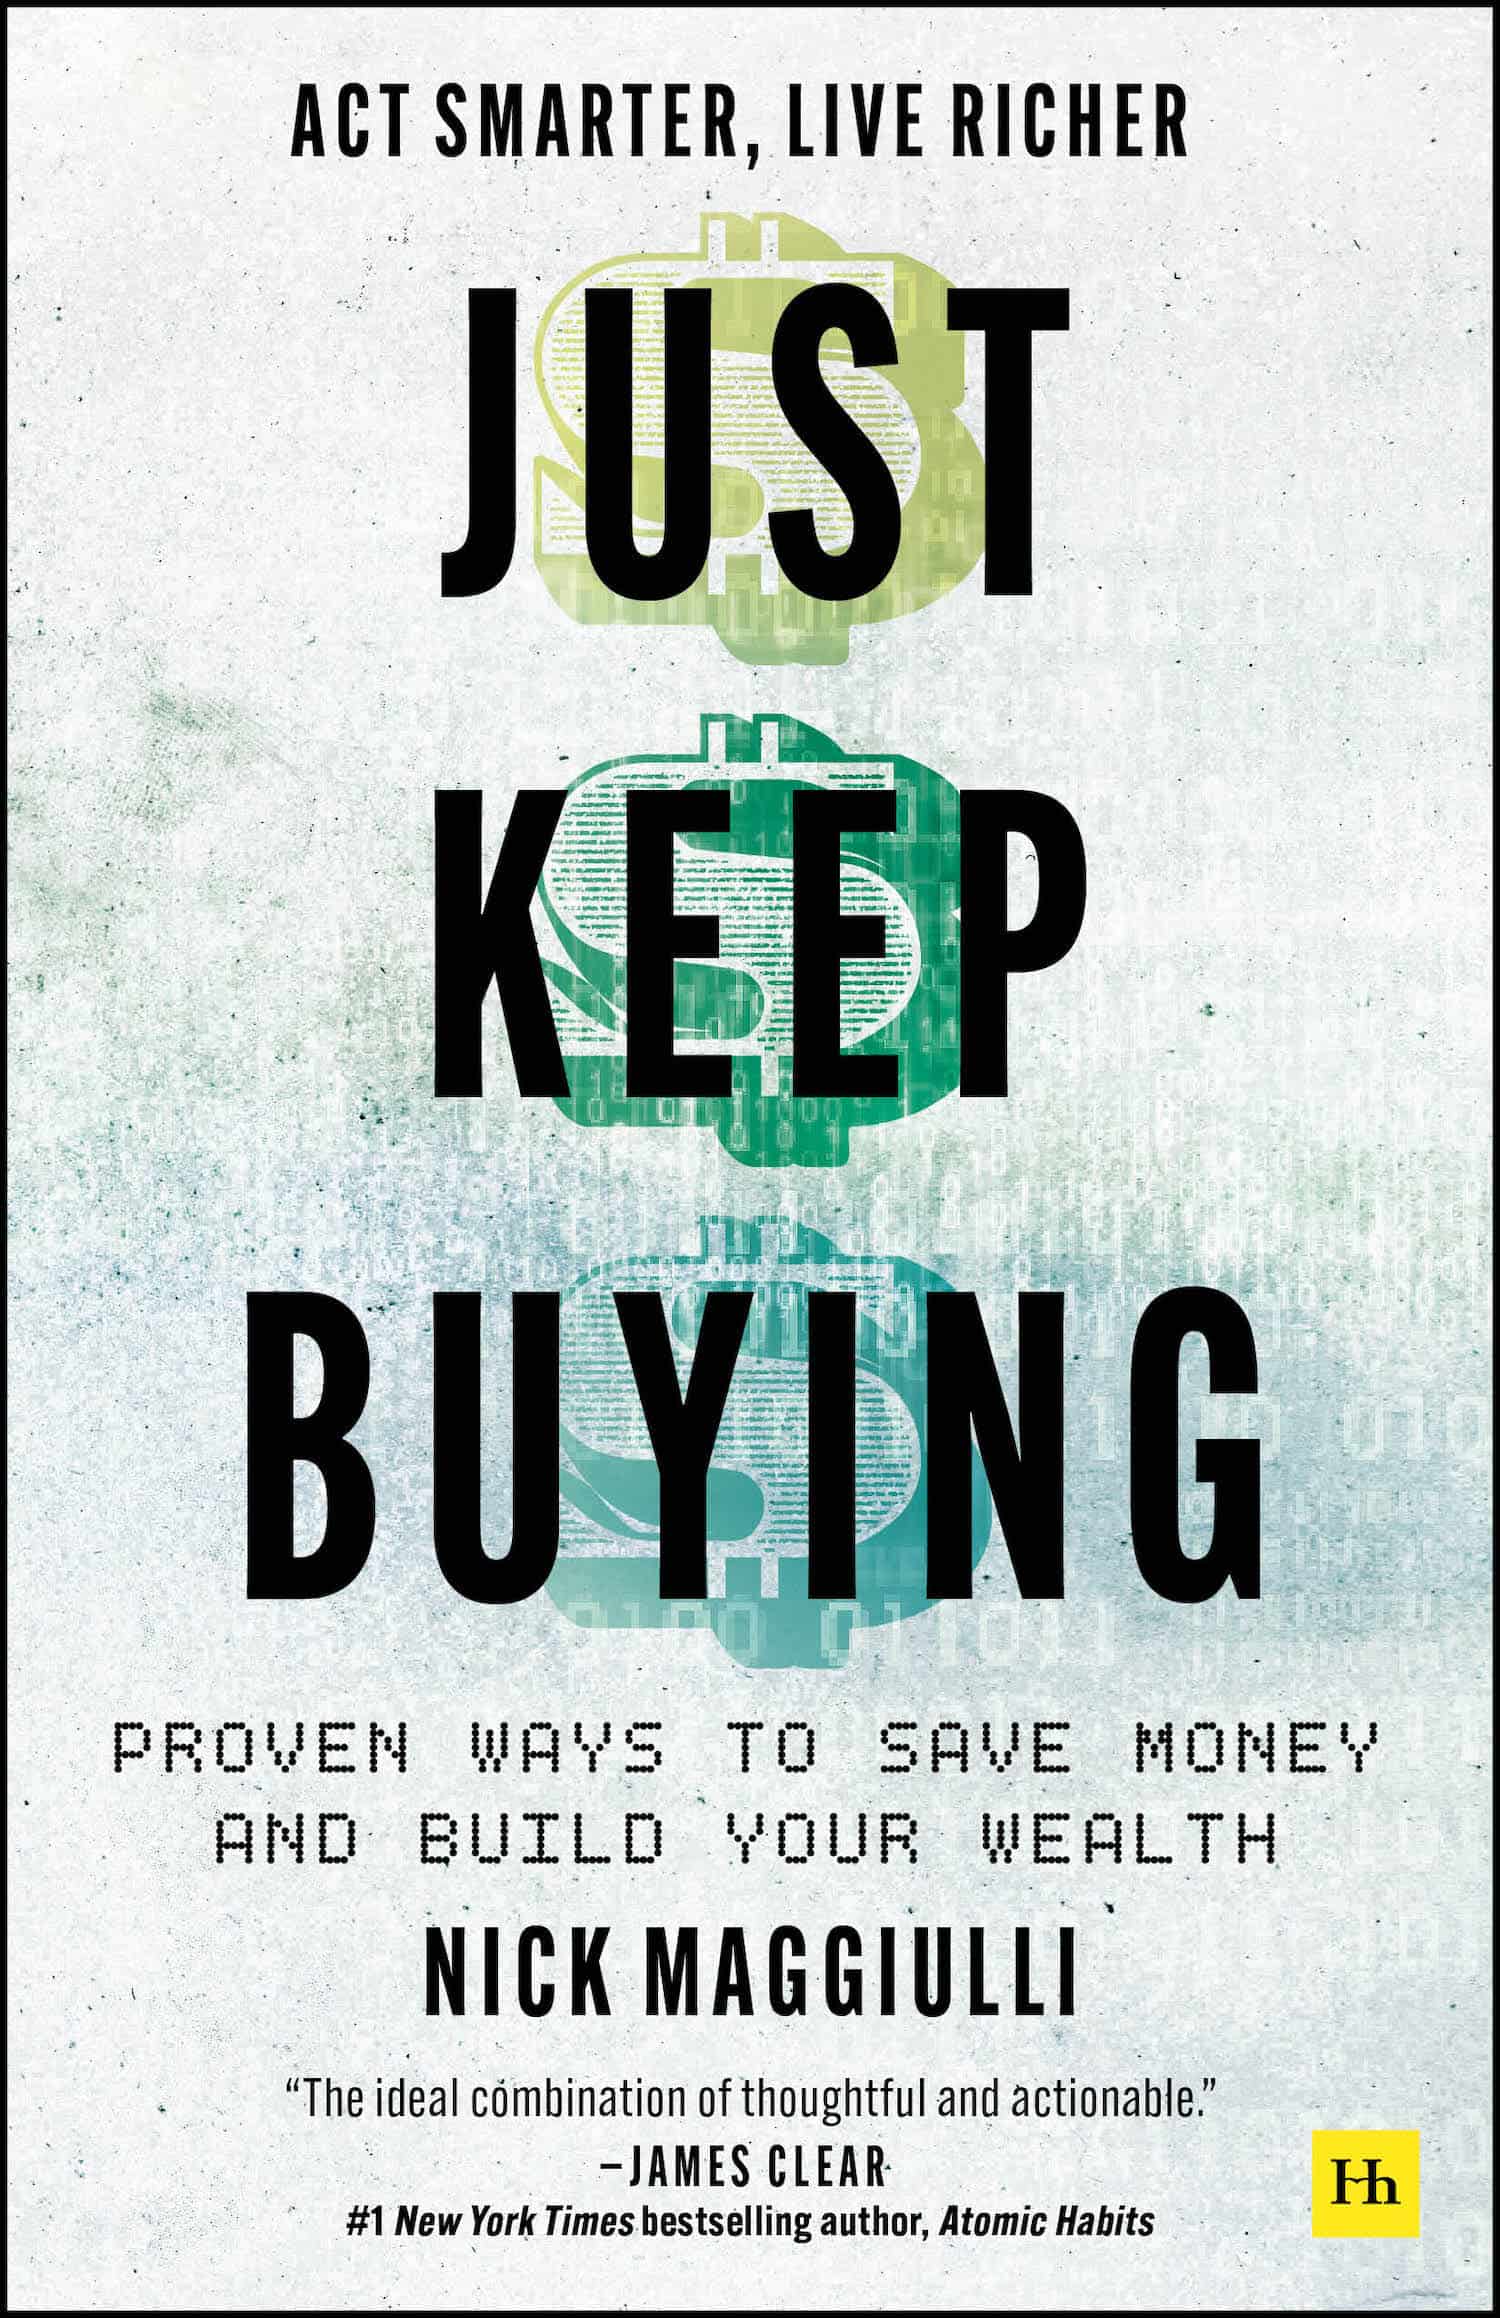 Just Keep Buying book cover by Nick Maggiulli.